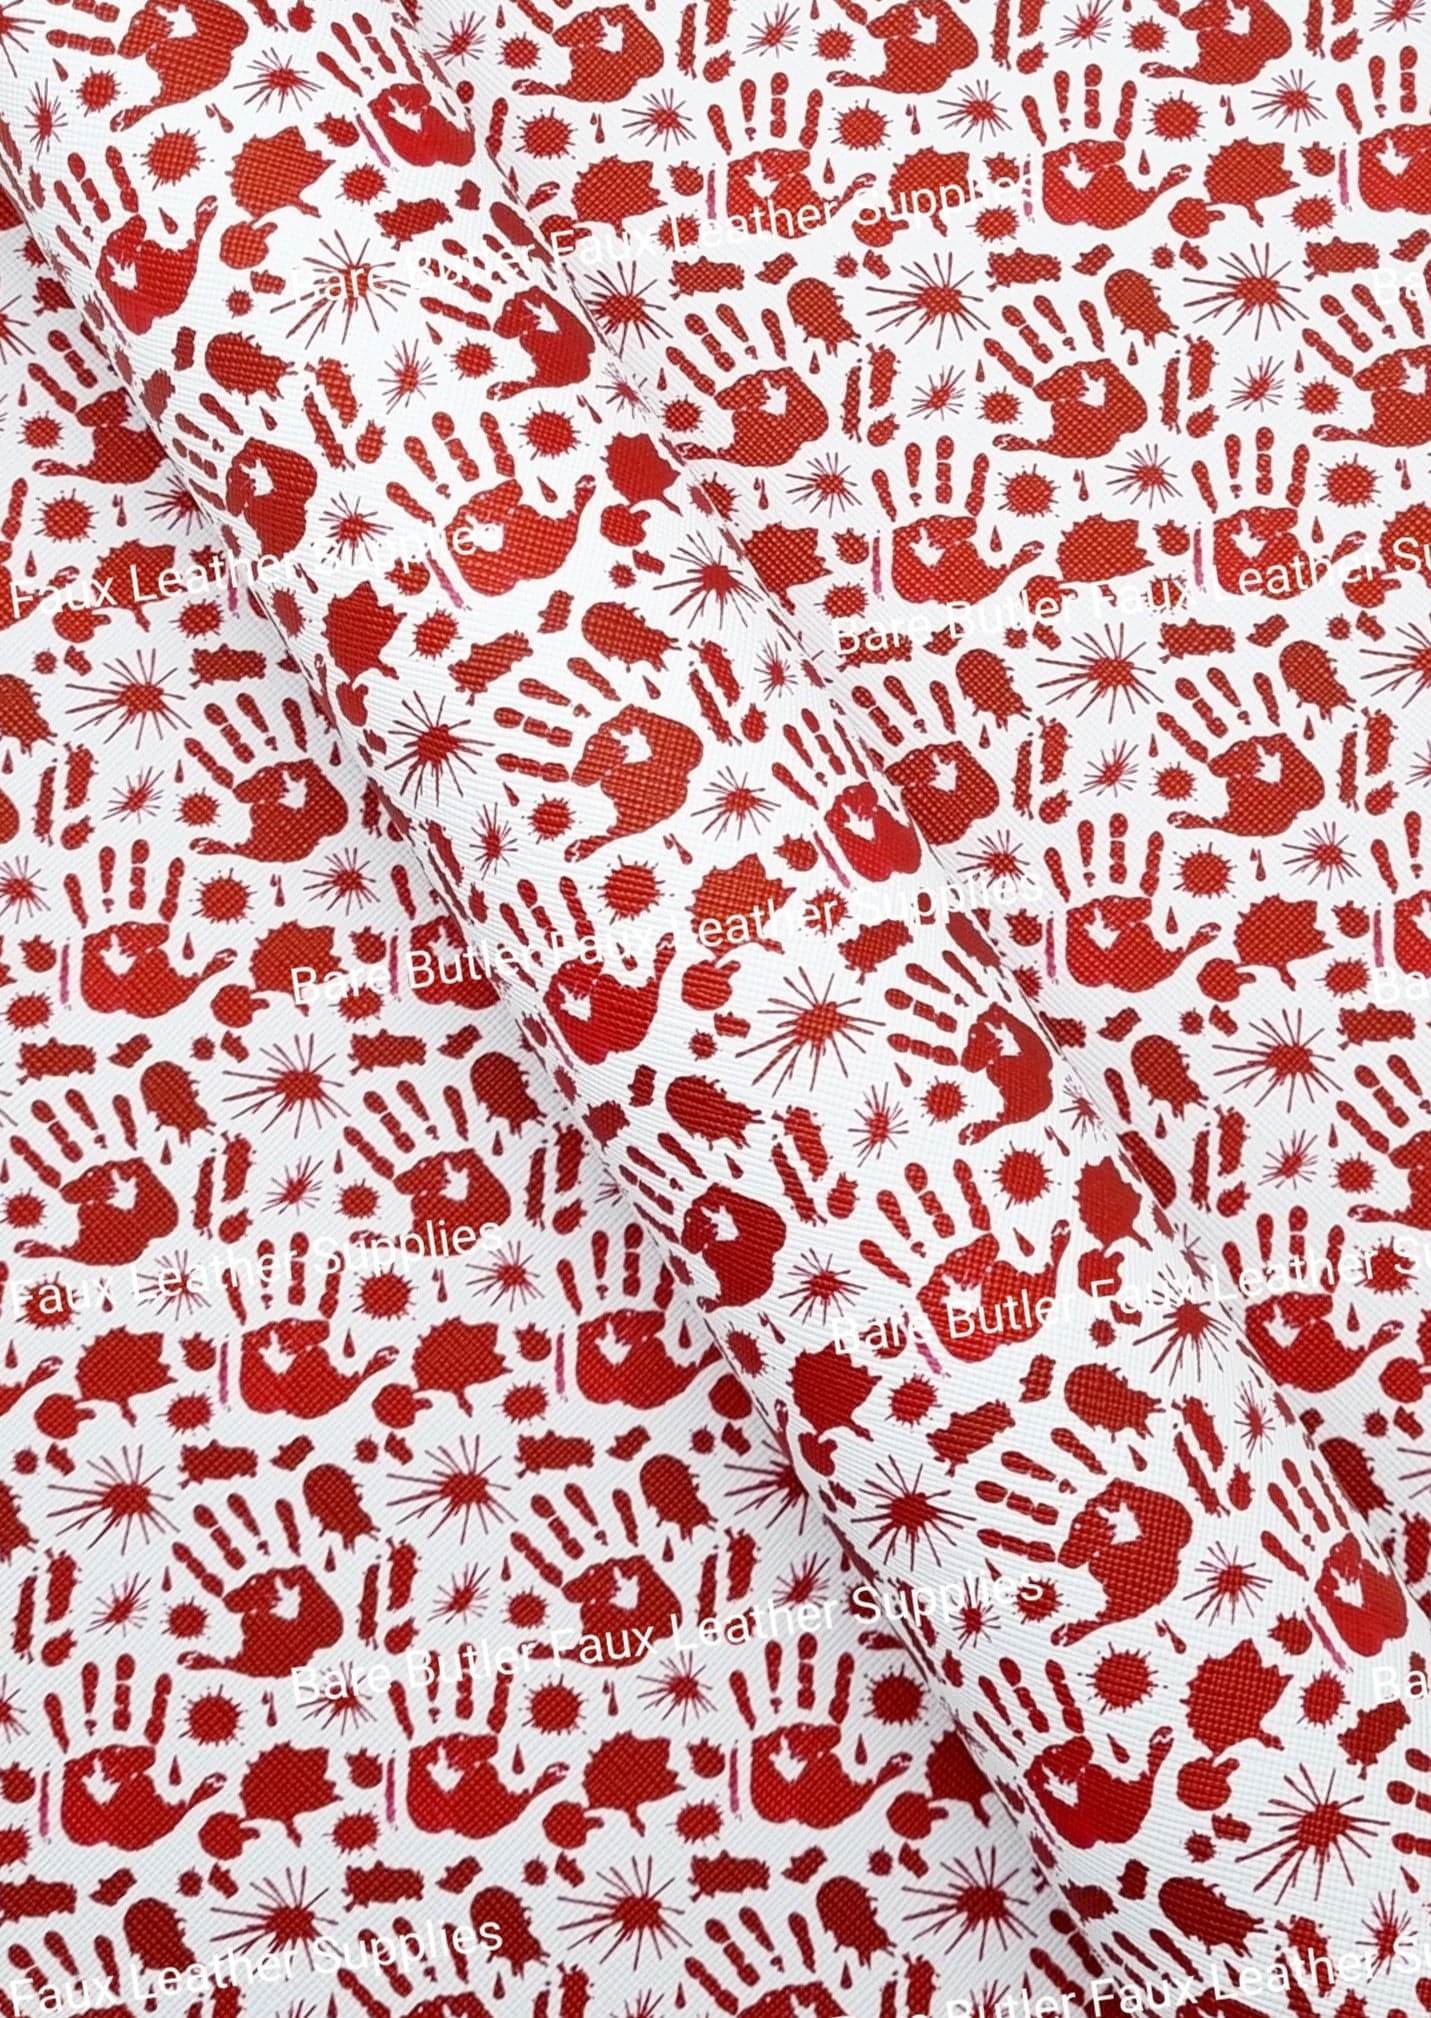 Bloody Hand Prints Faux Leather - Bare Butler Faux Leather Supplies 